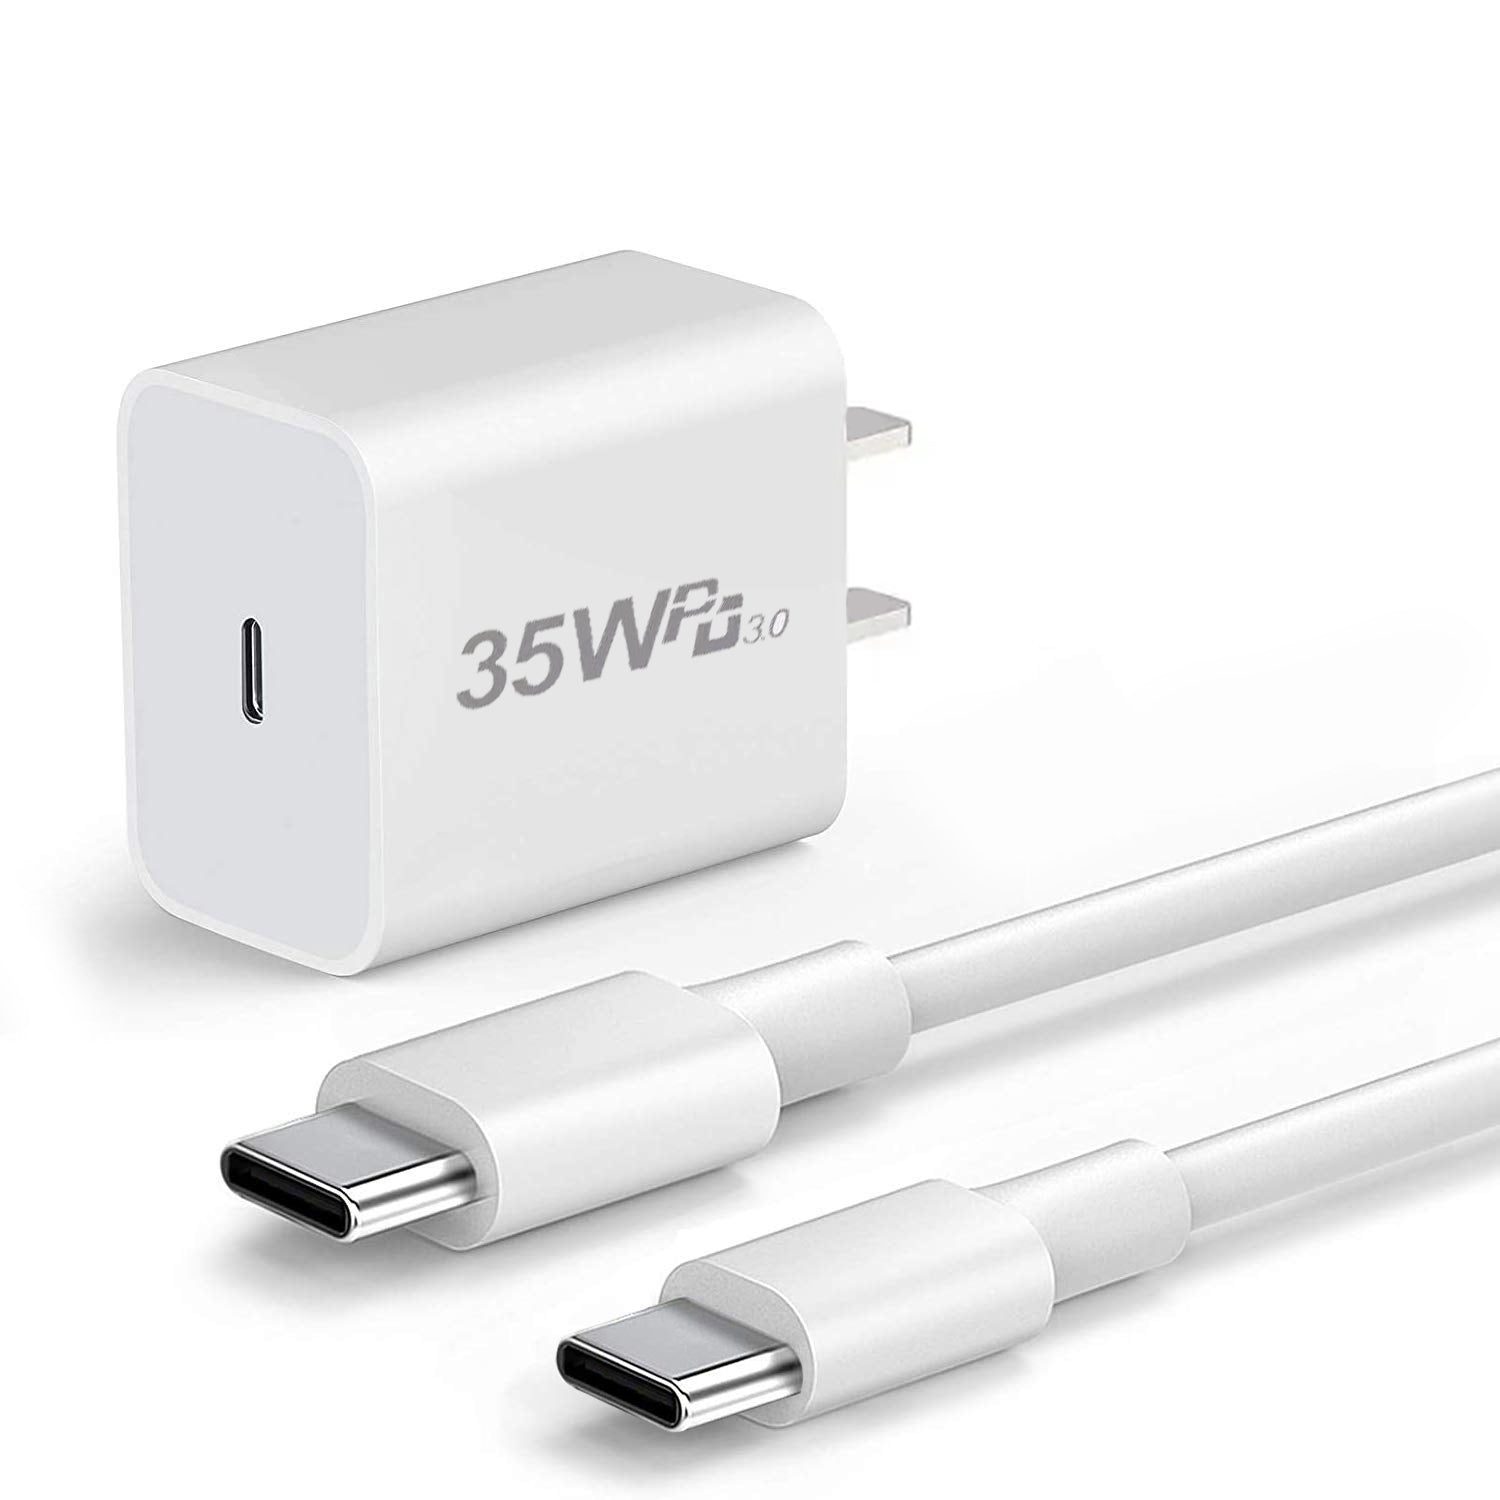 iPhone 15 USB-C: Do you need a new charging cable or adaptor